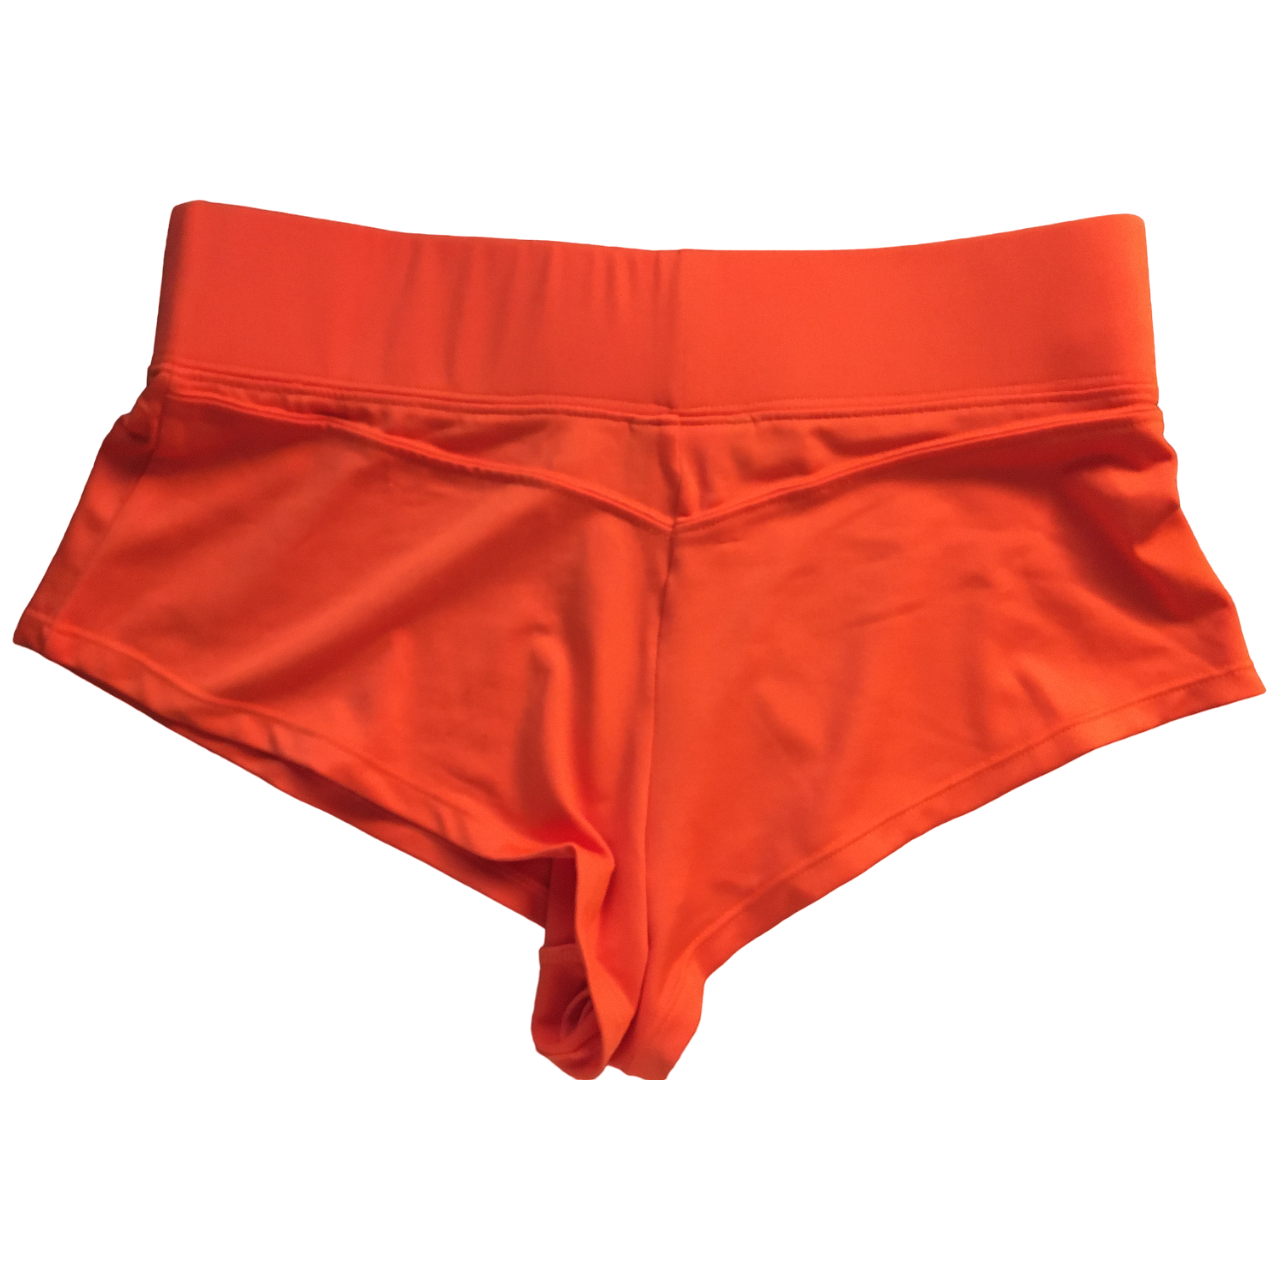 Hooters New Women's Uniform Outfit Costume Cheeky Orange Shorts